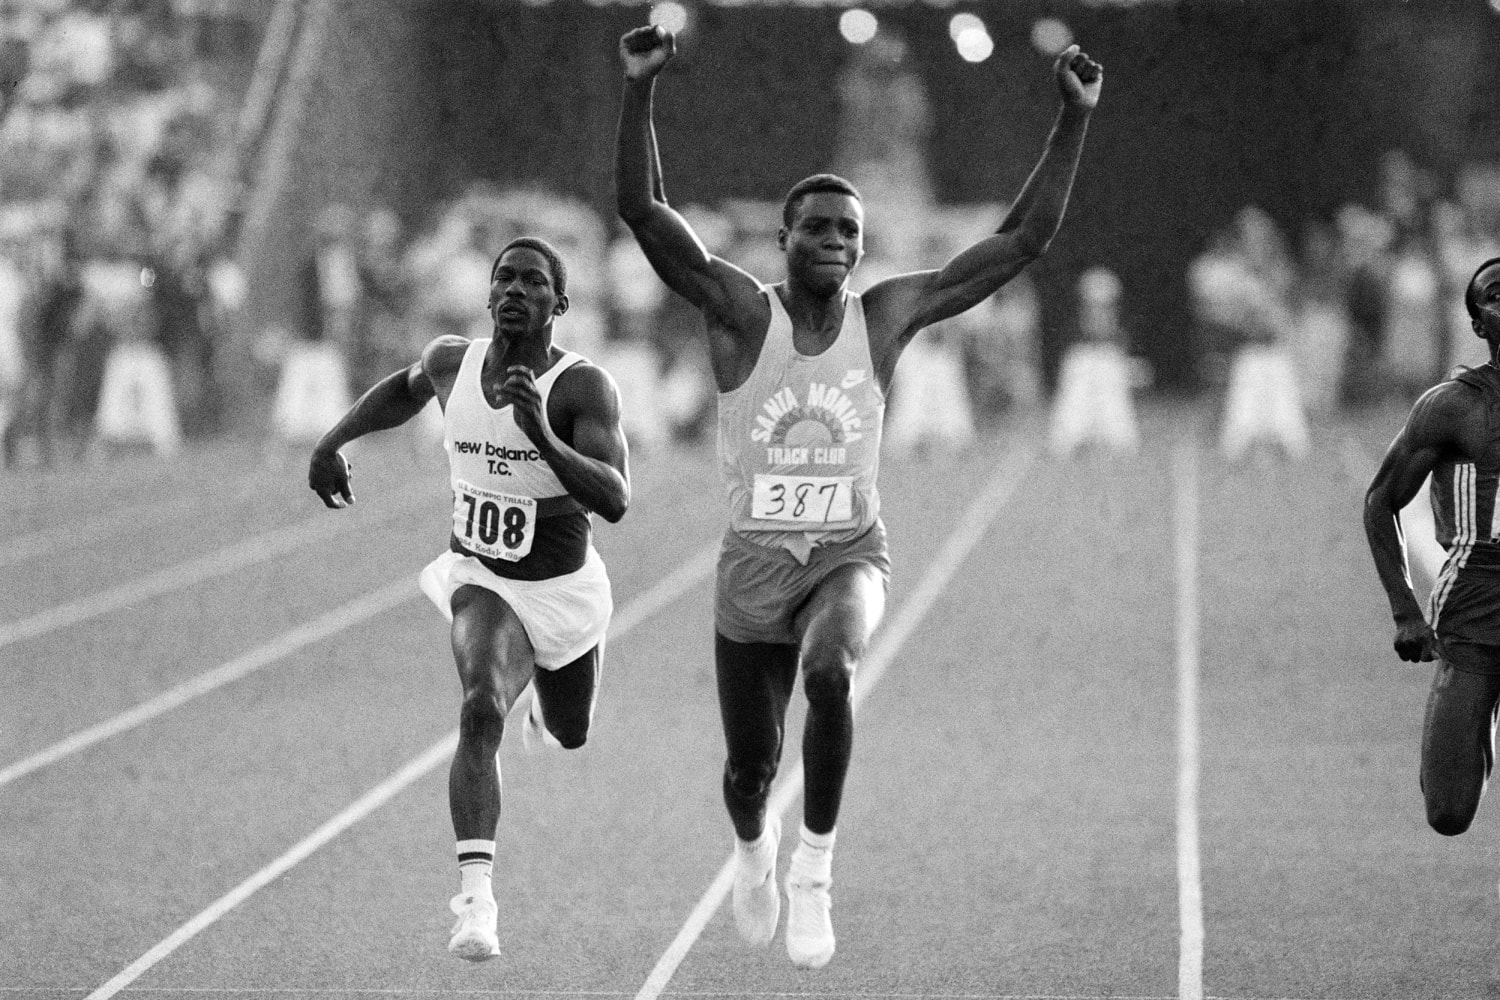 Former Olympian, track star Emmit King fatally shot during argument in Alabama